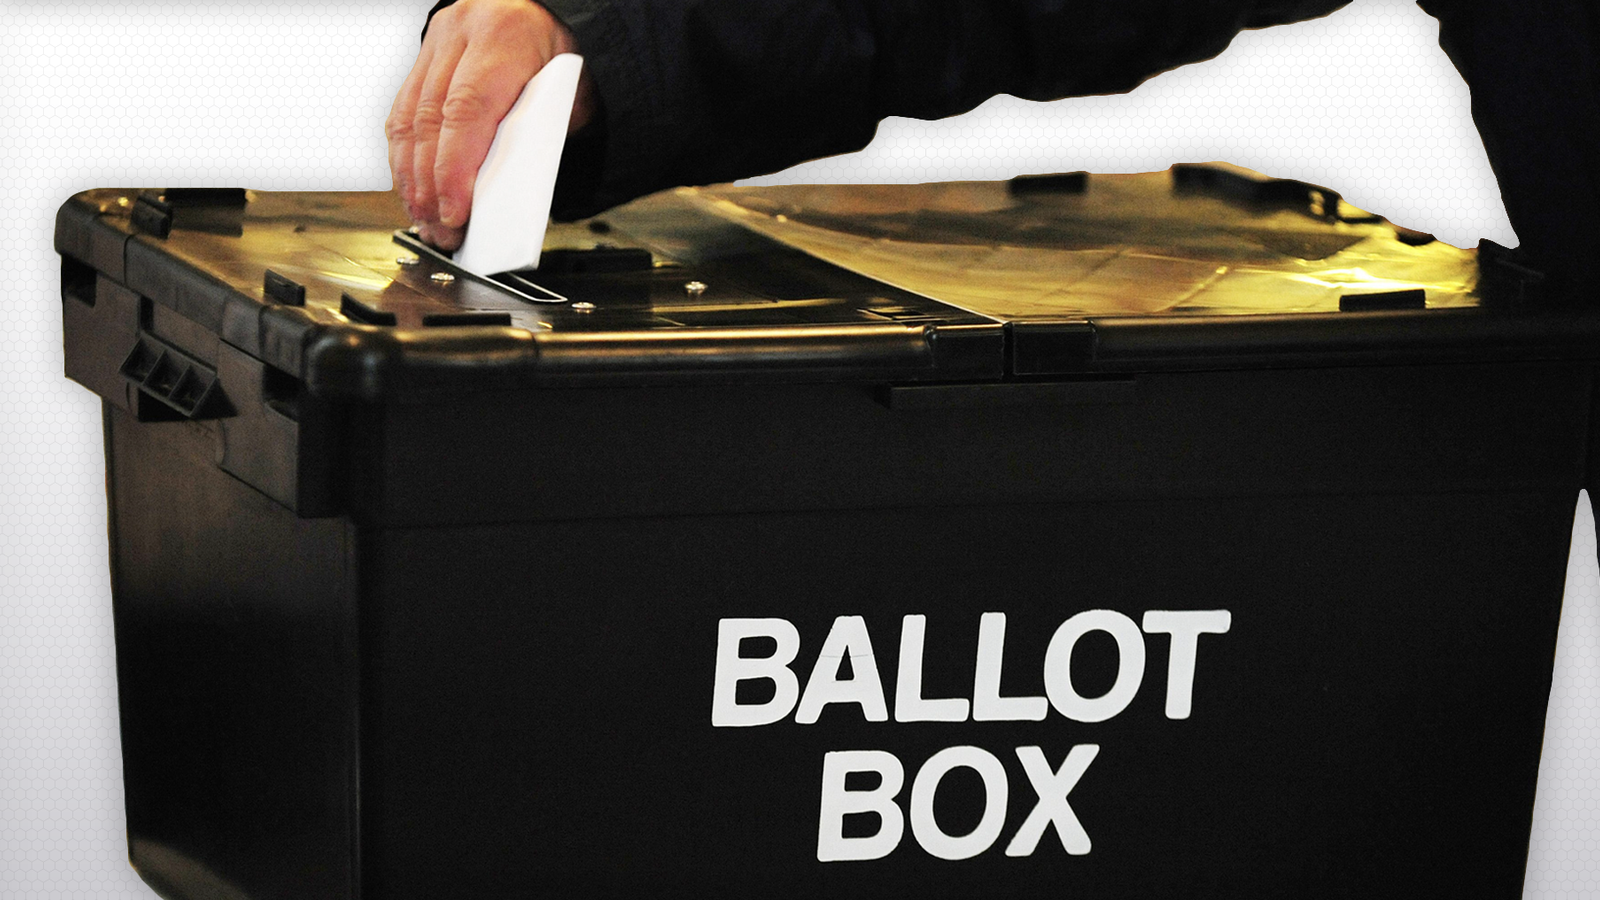 By-election polls open in Kingswood and Wellingborough